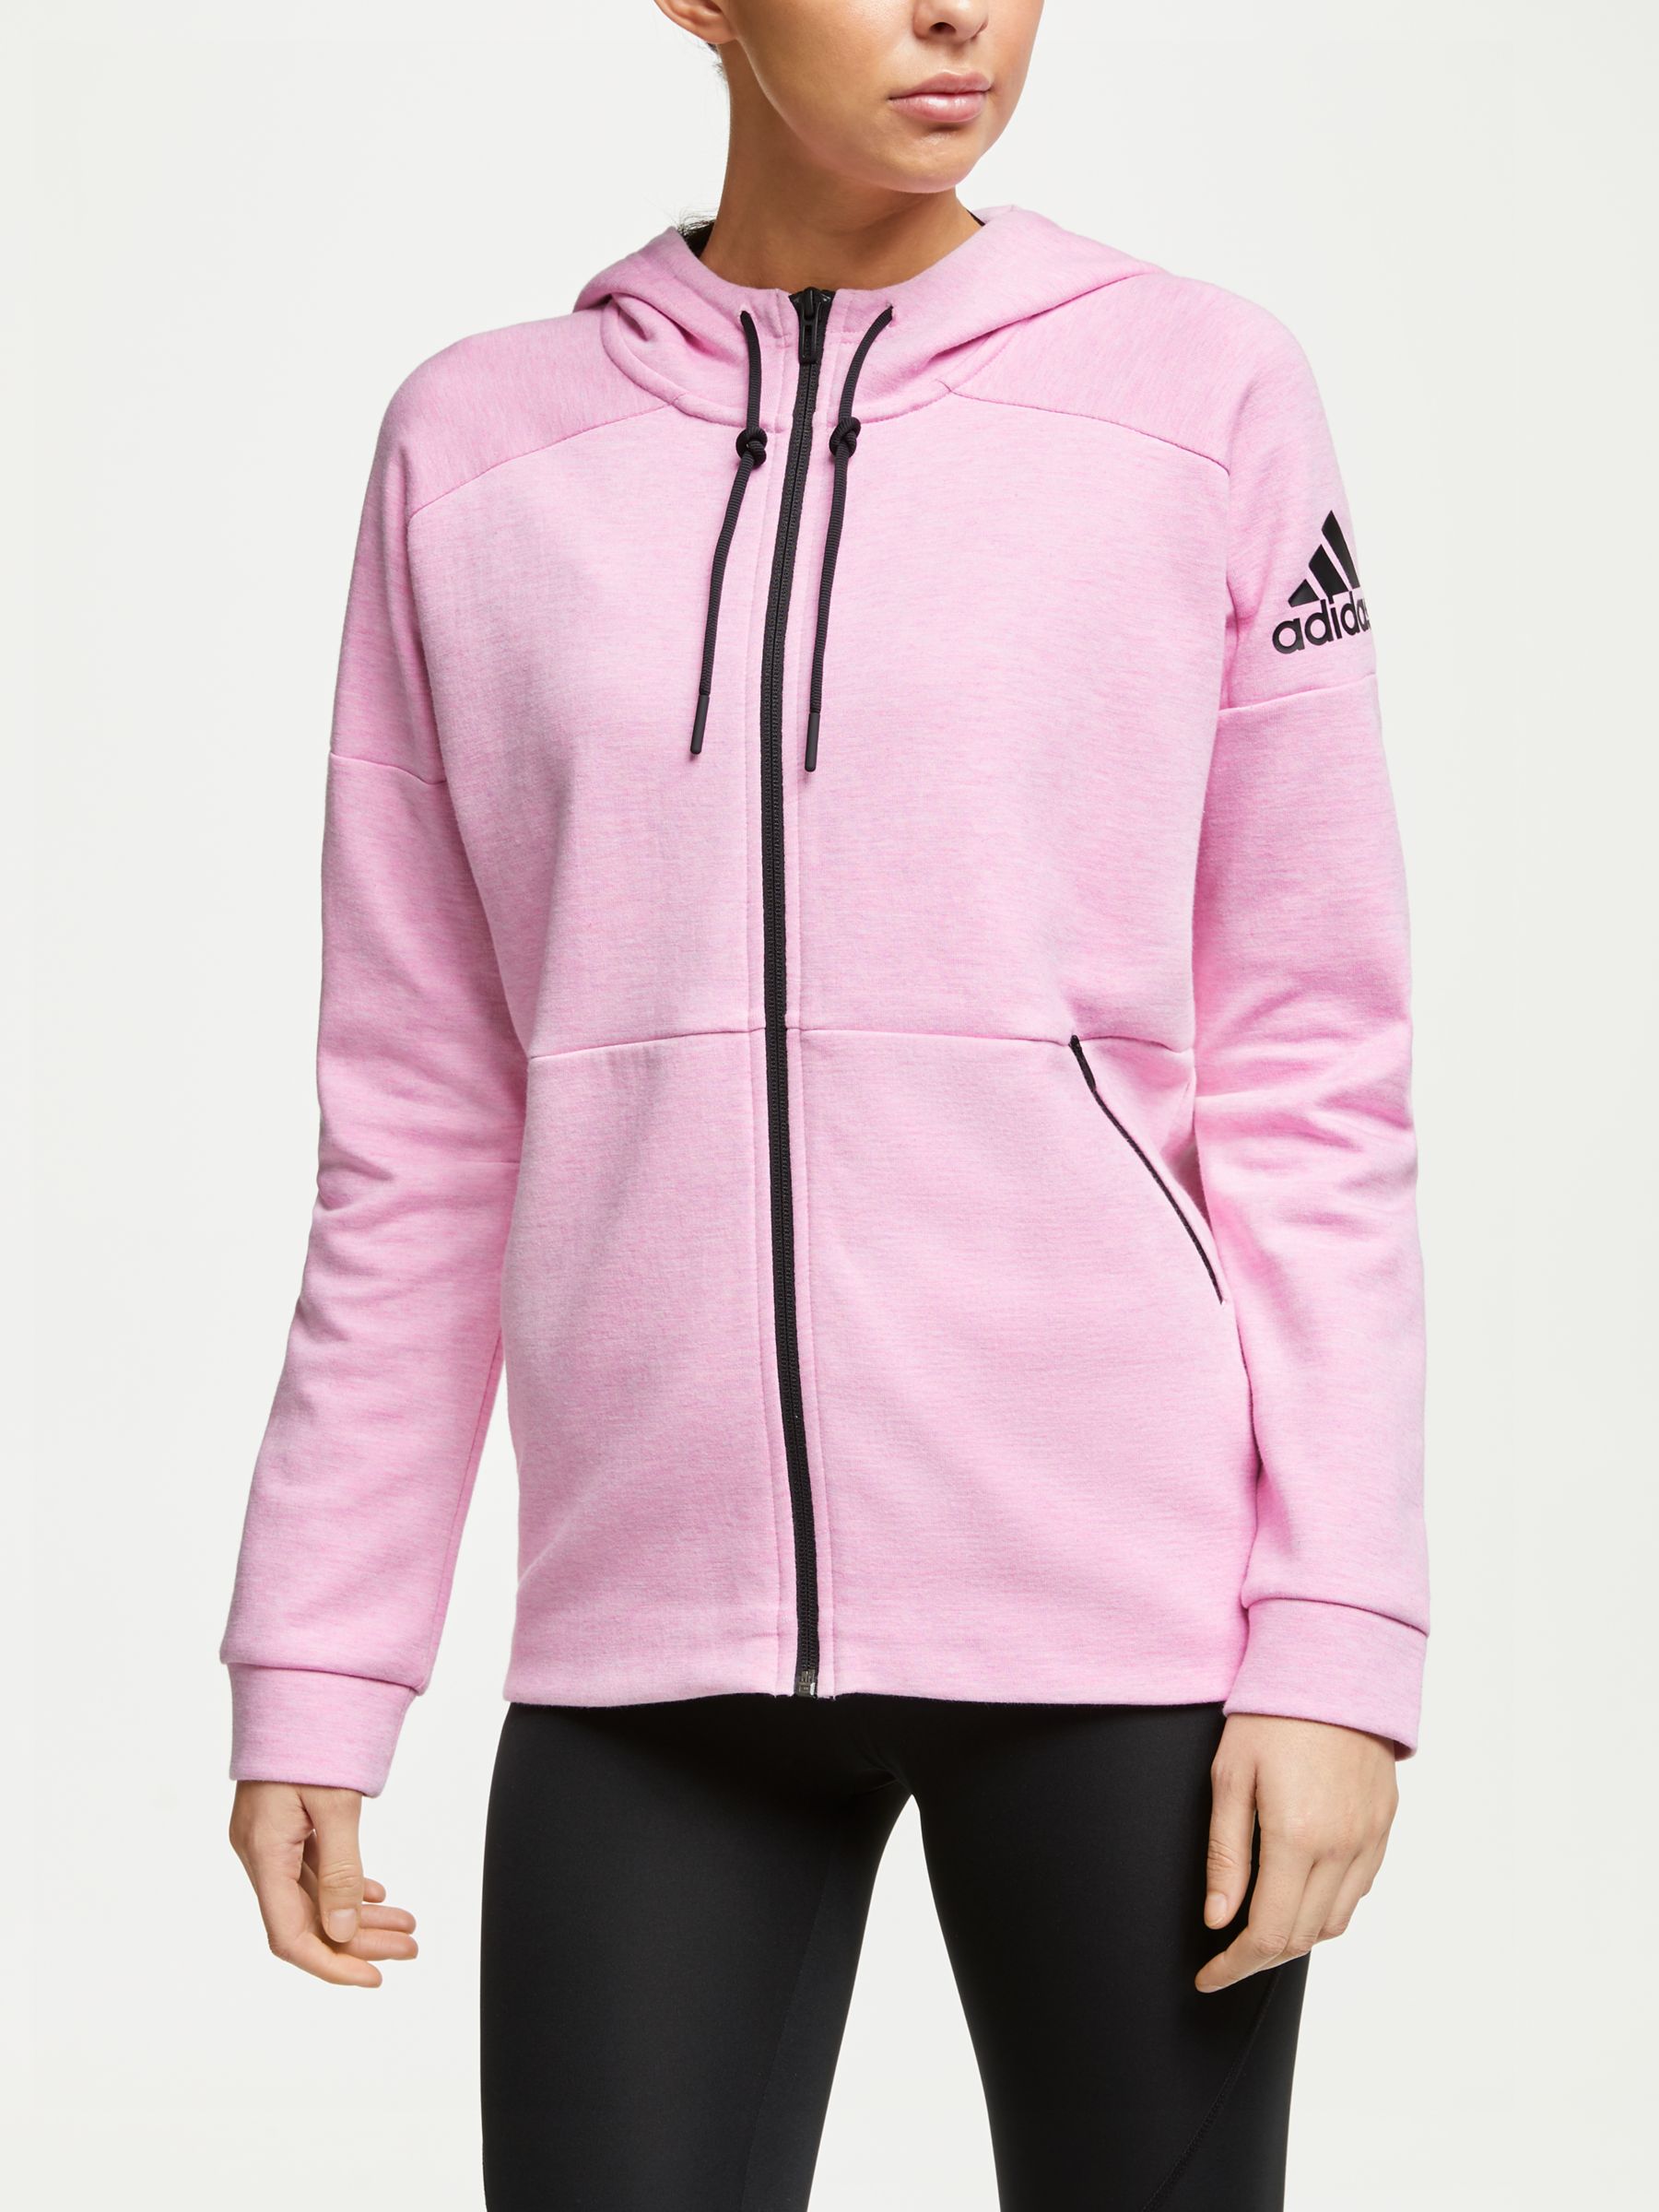 customize your own adidas hoodie